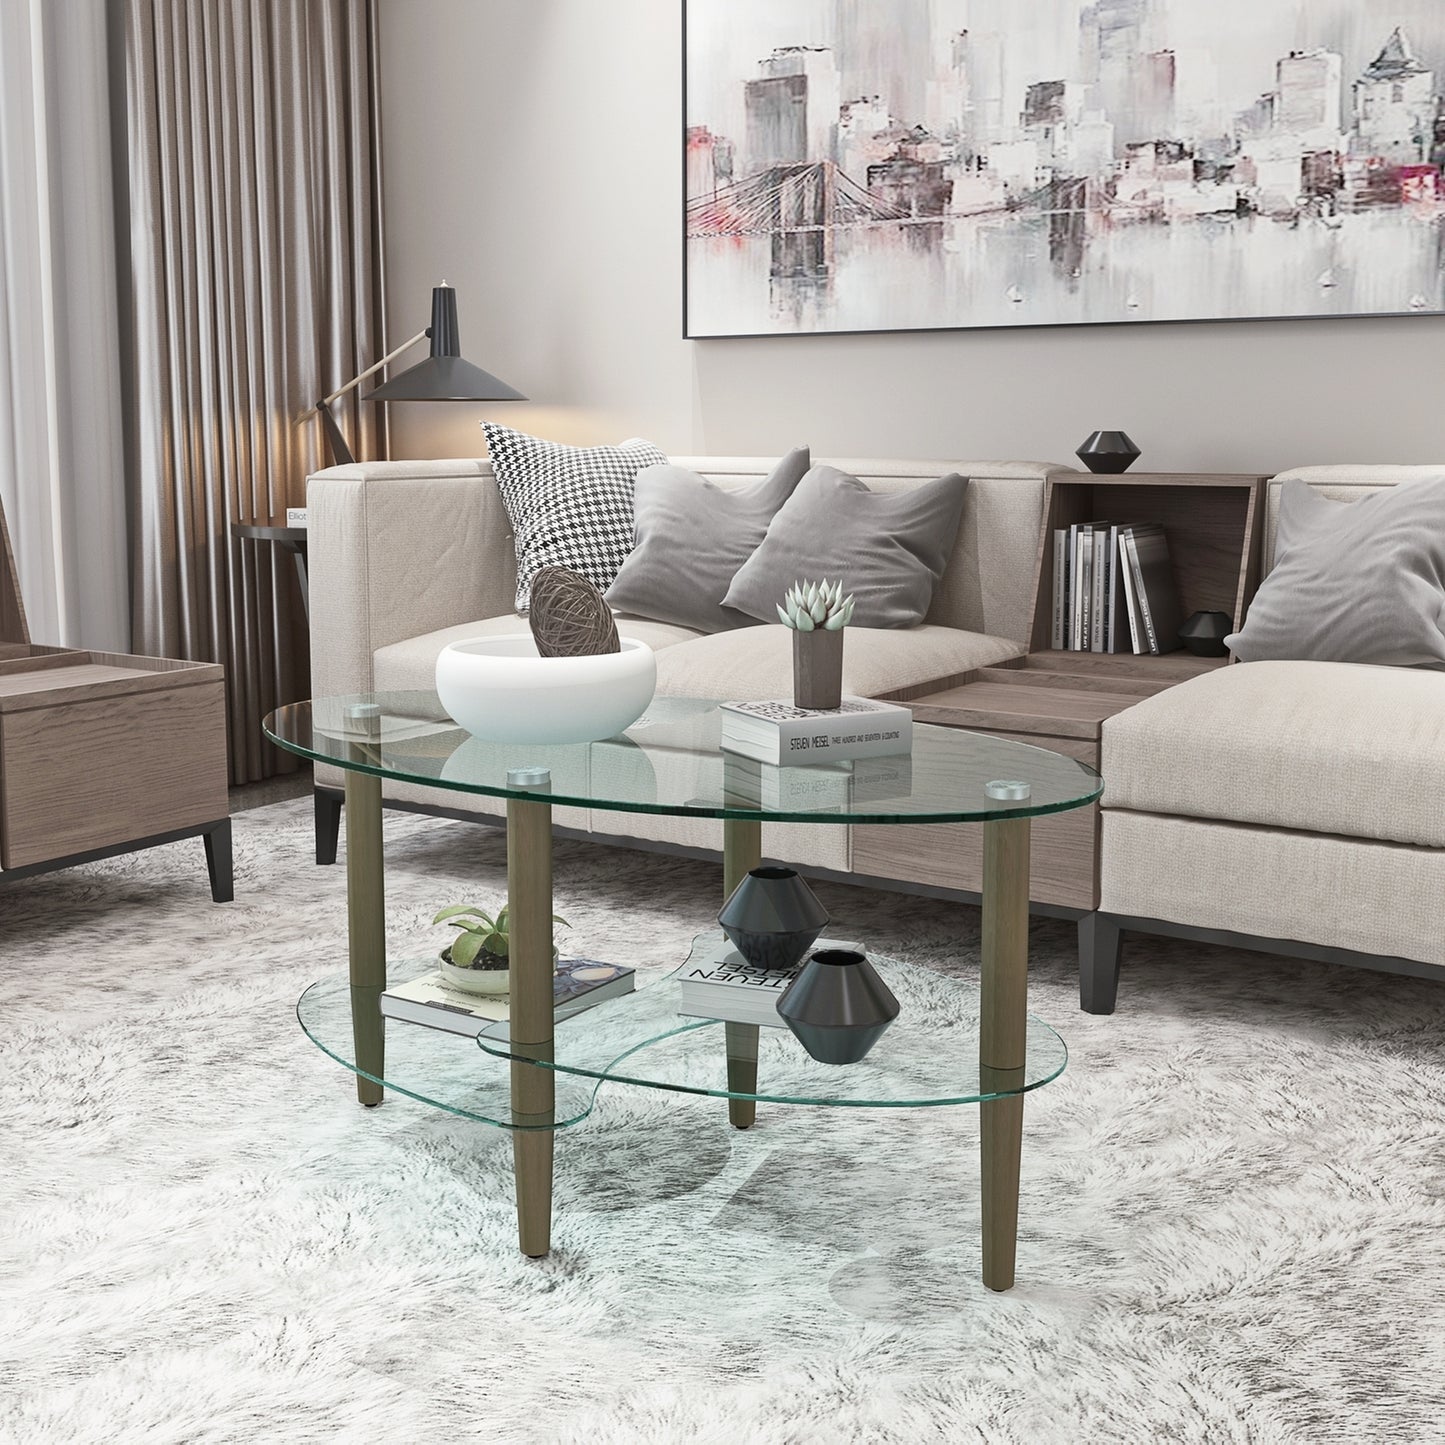 Elegant Transparent Oval Glass Coffee Table with Oak Wood Legs